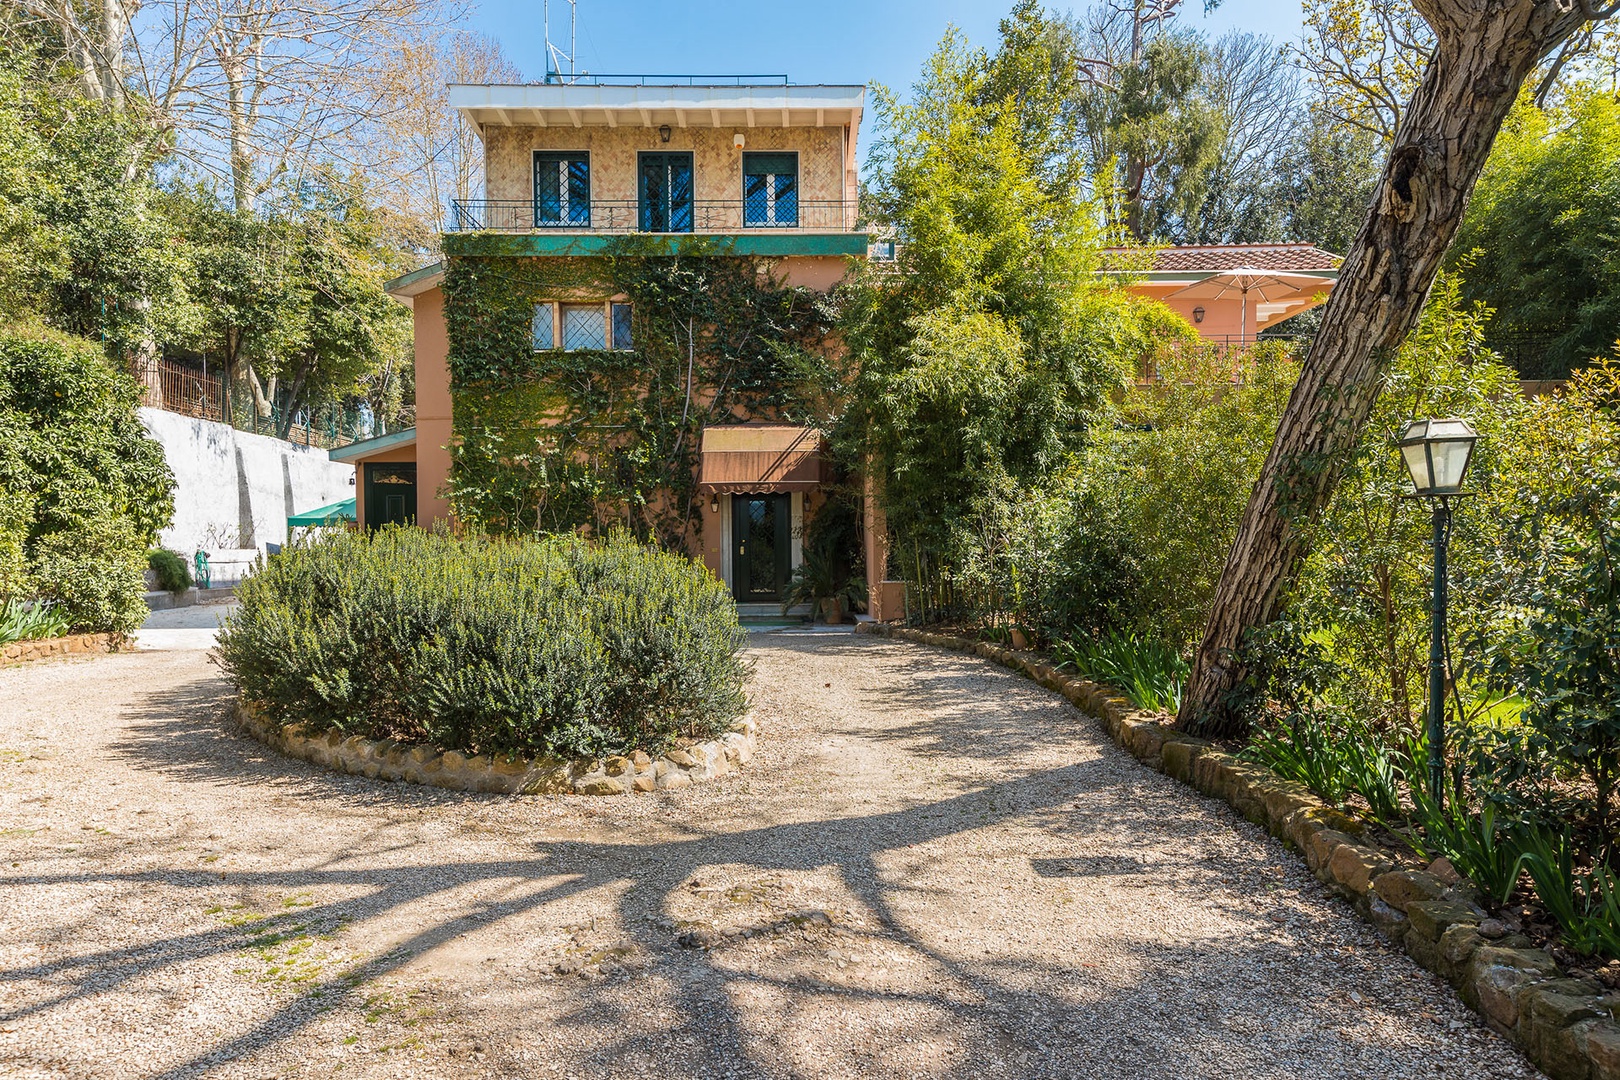 What a rare find! An independent villa in such a prime location is very unusual and sought-after.